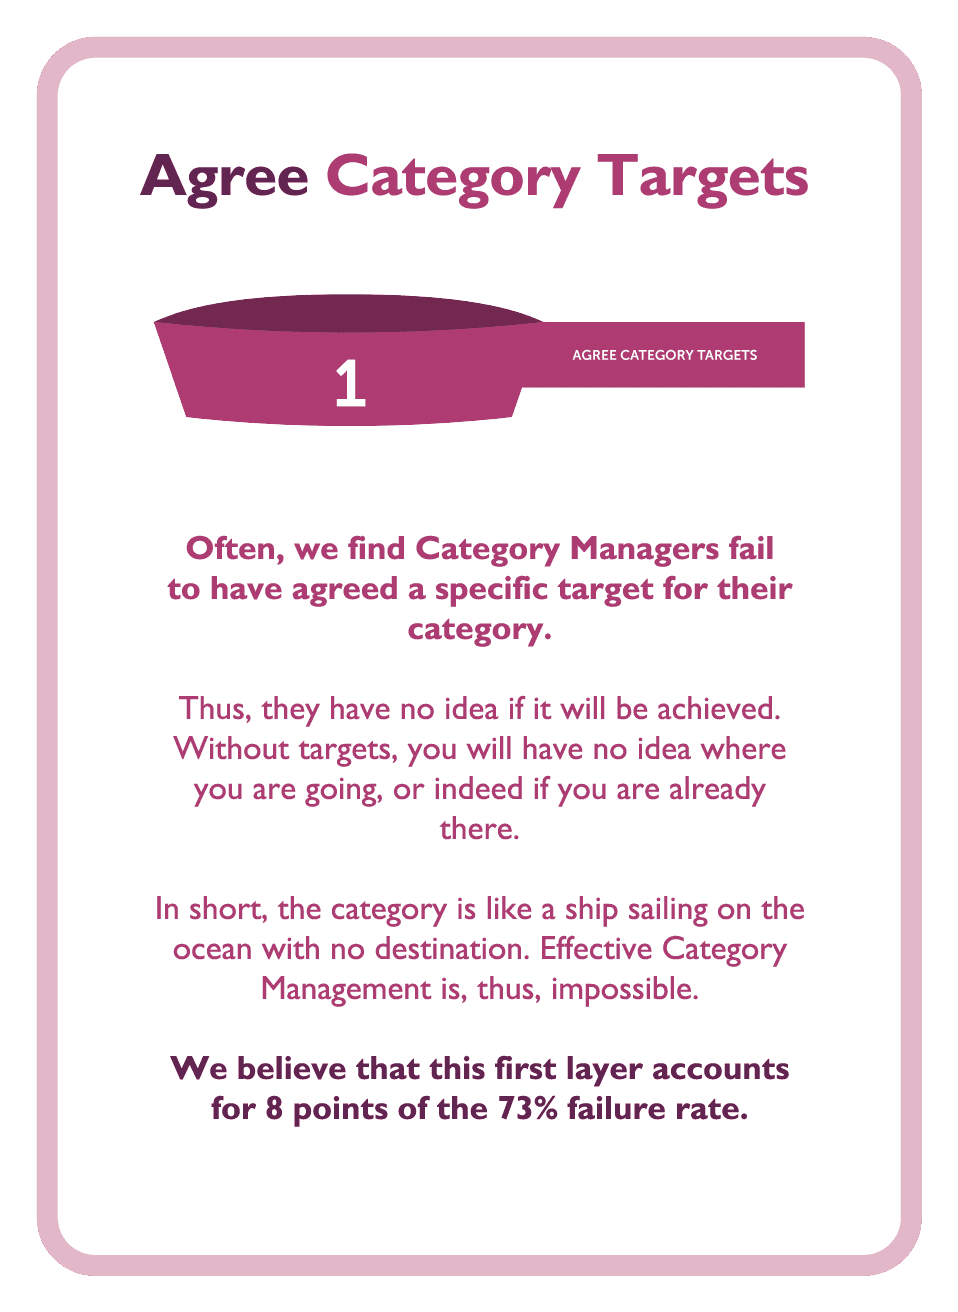 Category management coaching card titled Agree Category Targets